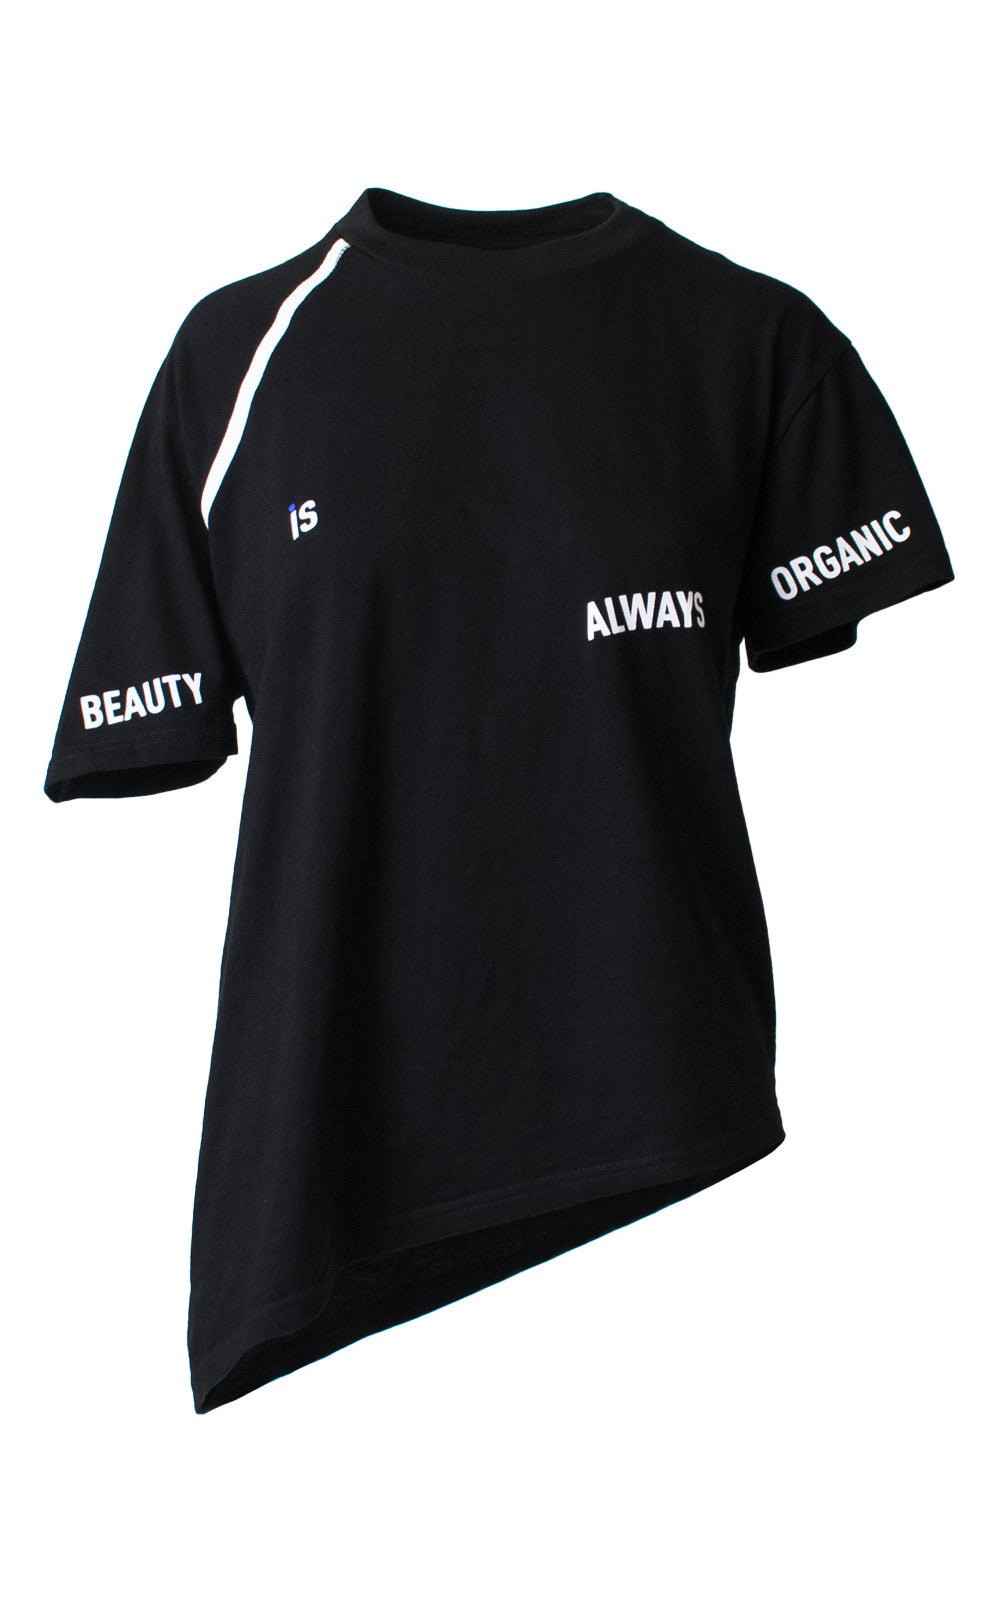 Black Asymmetrical Screen Printed Graphic Tee Front